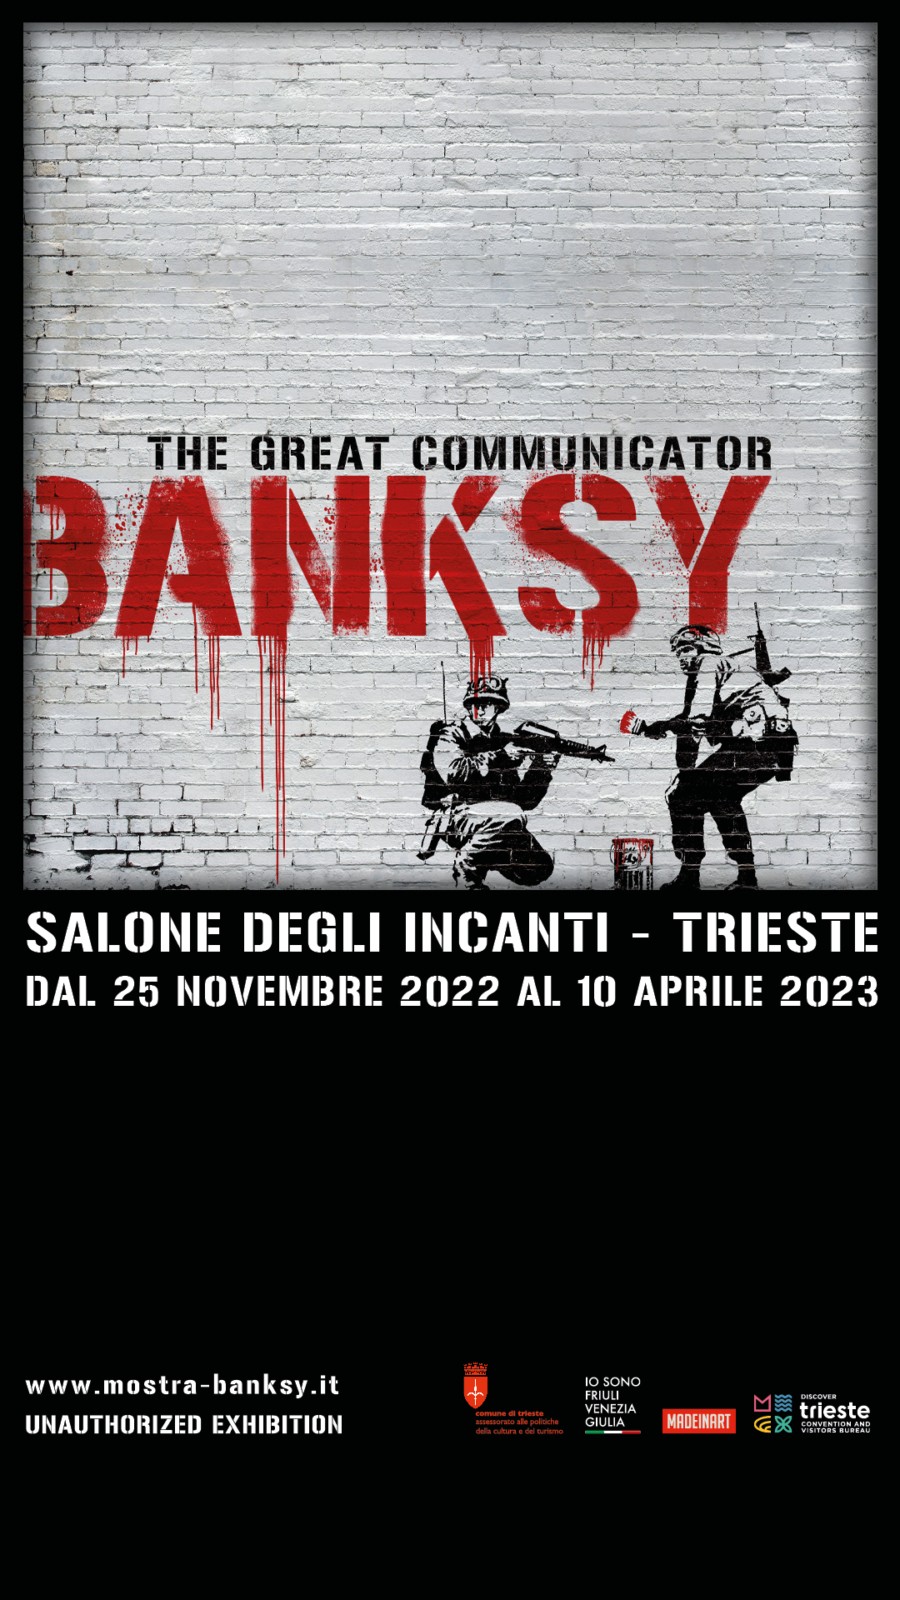 BANKSY The Great Communicator, Book and buy FVG CARD to have free access to the Banksy exhibition, as well as the usual free or reduced entrance to museums, castles, etc. SALONE DEGLI INCANTI TRIESTE FROM 25th NOVEMBER 2022 TO 10th APRIL 2023.